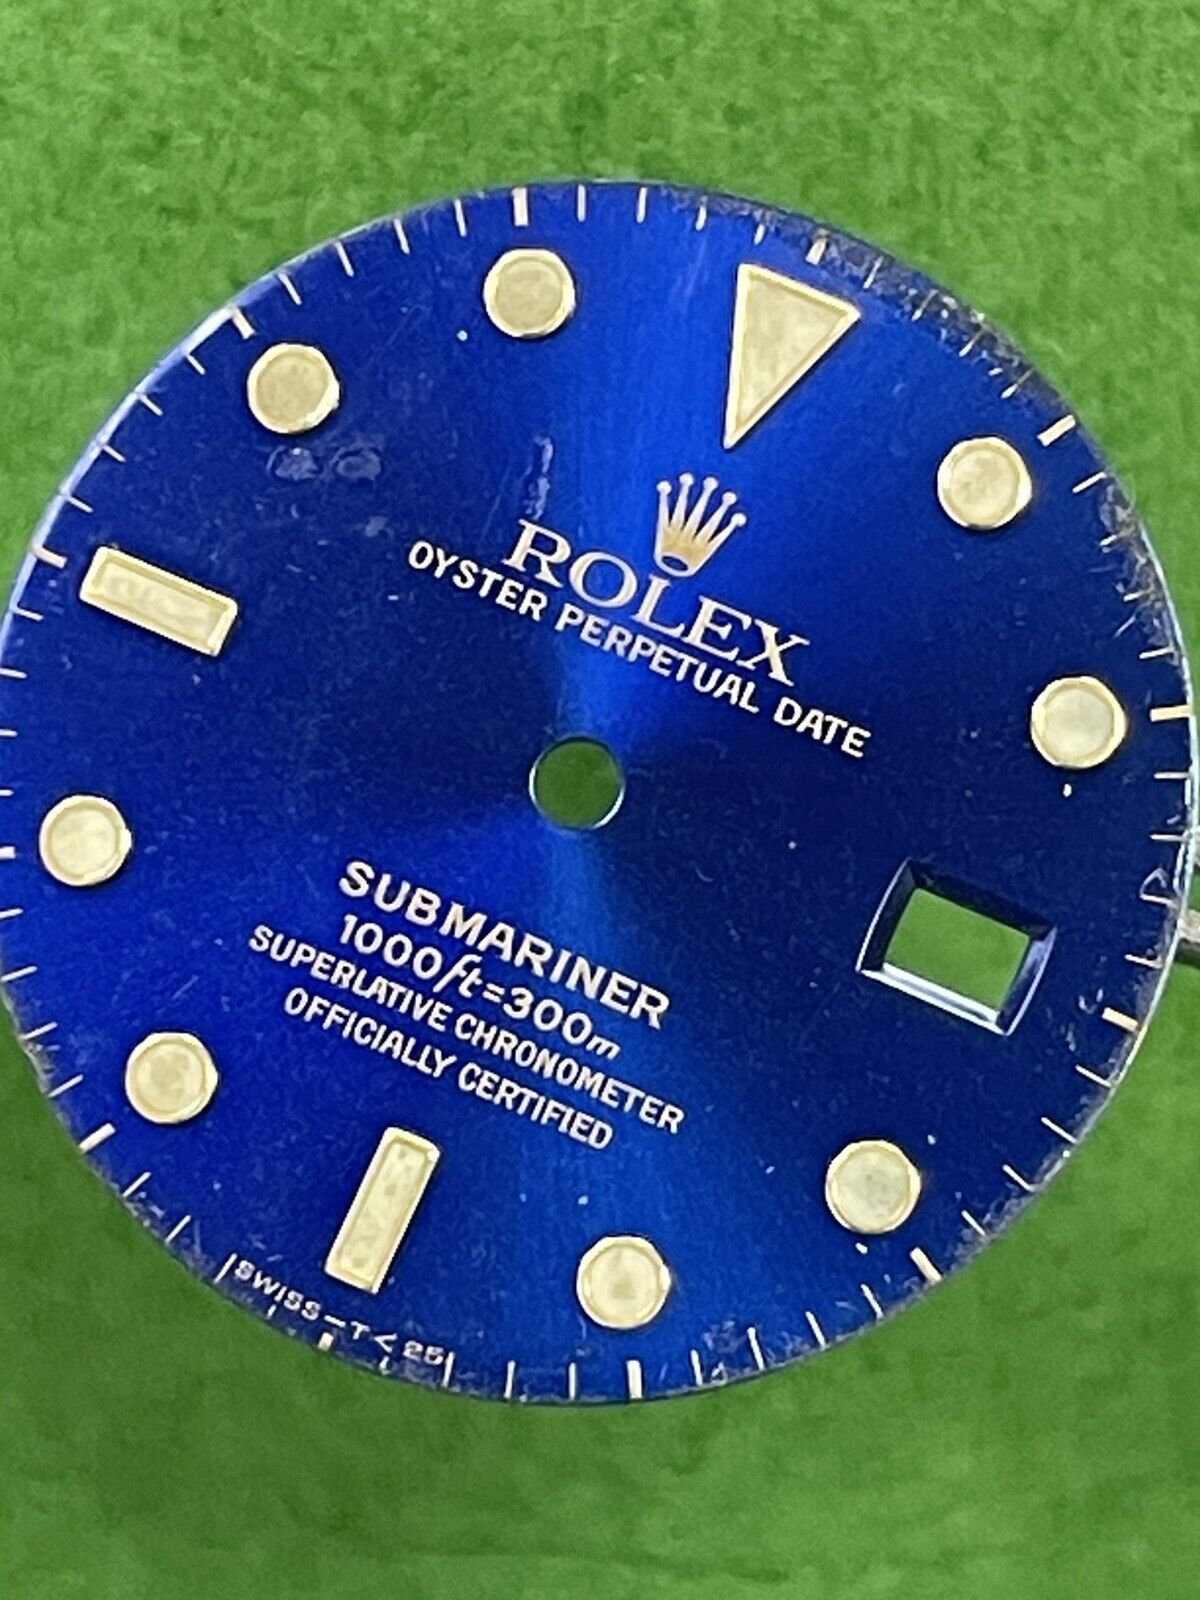 Vintage Used Rolex Submariner 16613 Watch DIAL Blue Men For Parts Hk30